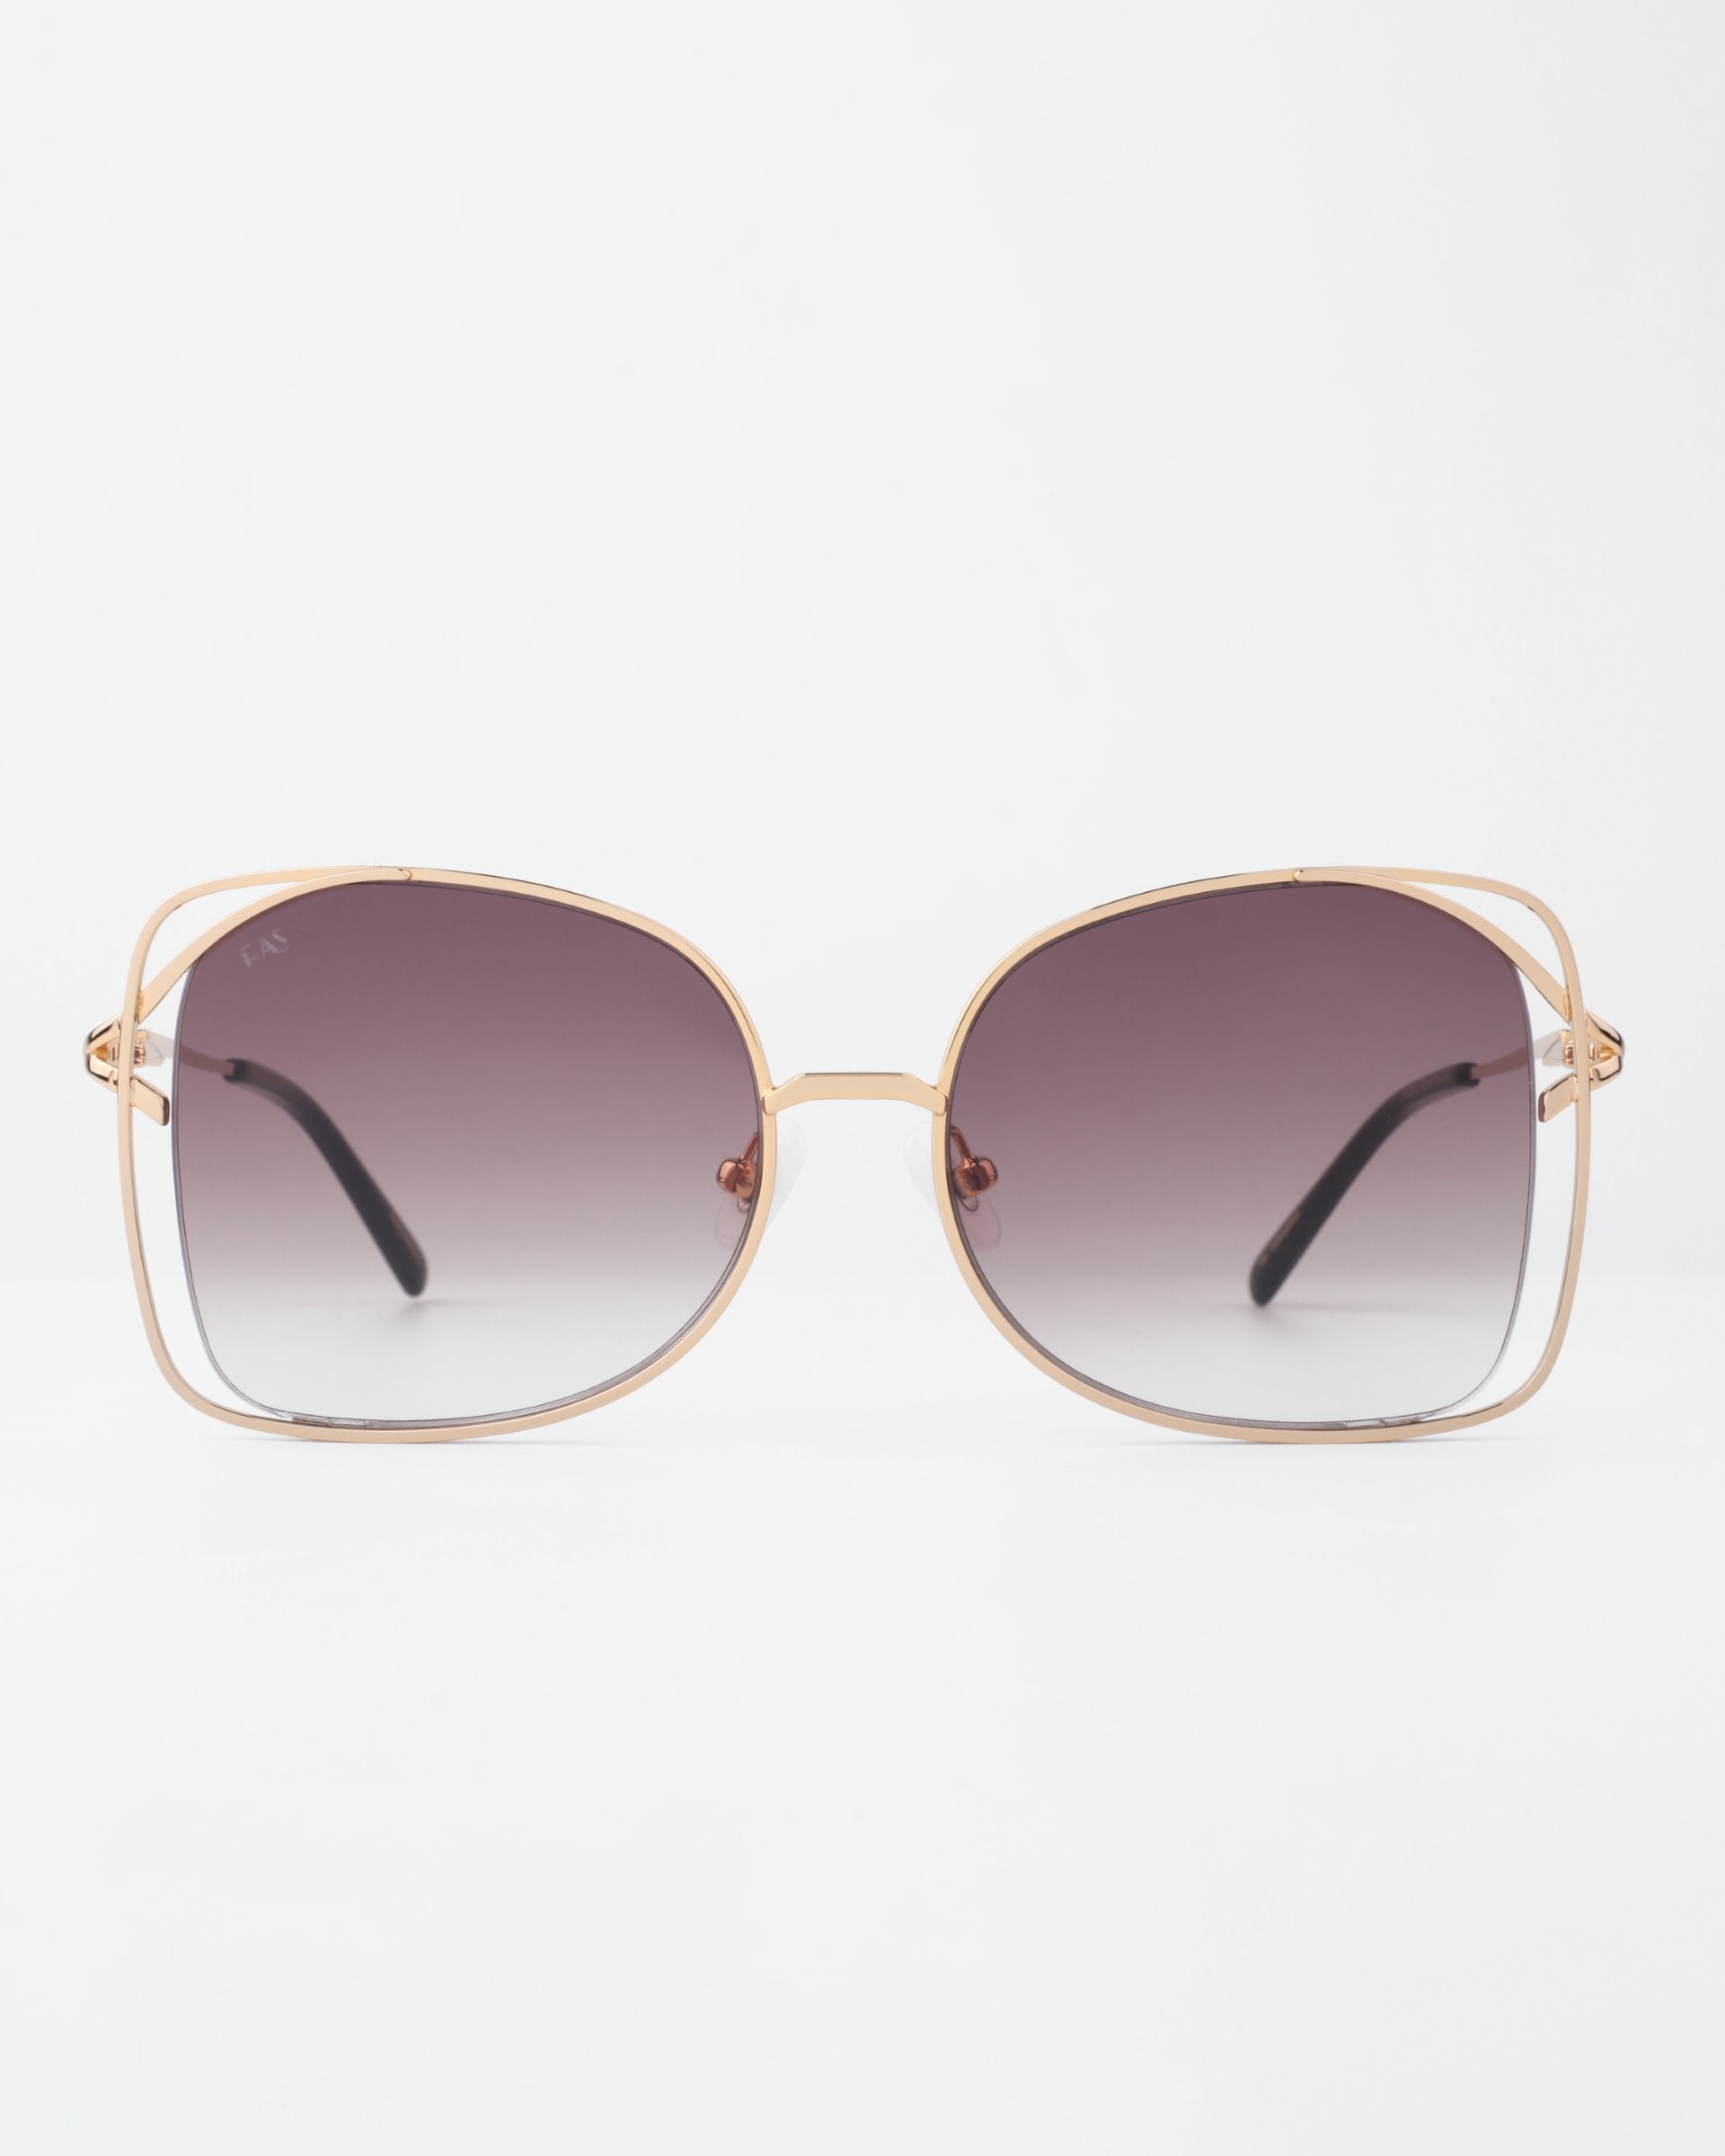 A pair of large, square handmade Carousel sunglasses from For Art&#39;s Sake® with gold-plated stainless steel frames and gradient lenses, transitioning from dark at the top to lighter at the bottom. The sunglasses offer UVA &amp; UVB protection and are placed upright against a white background.